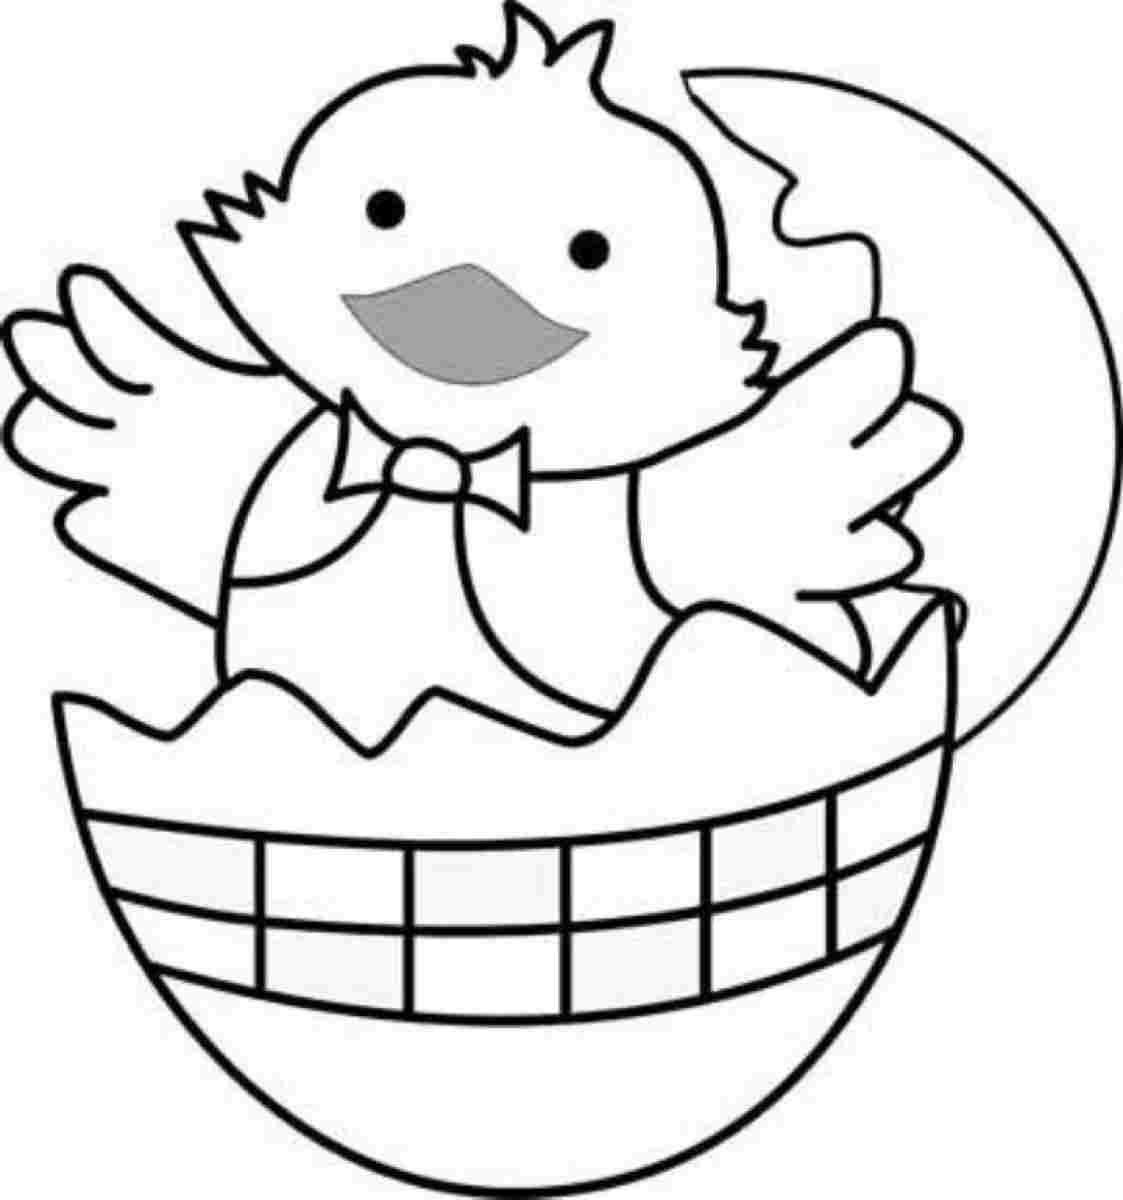 Free Easter Chicks Coloring Page, Download Free Clip Art, Free Clip Art on  Clipart Library